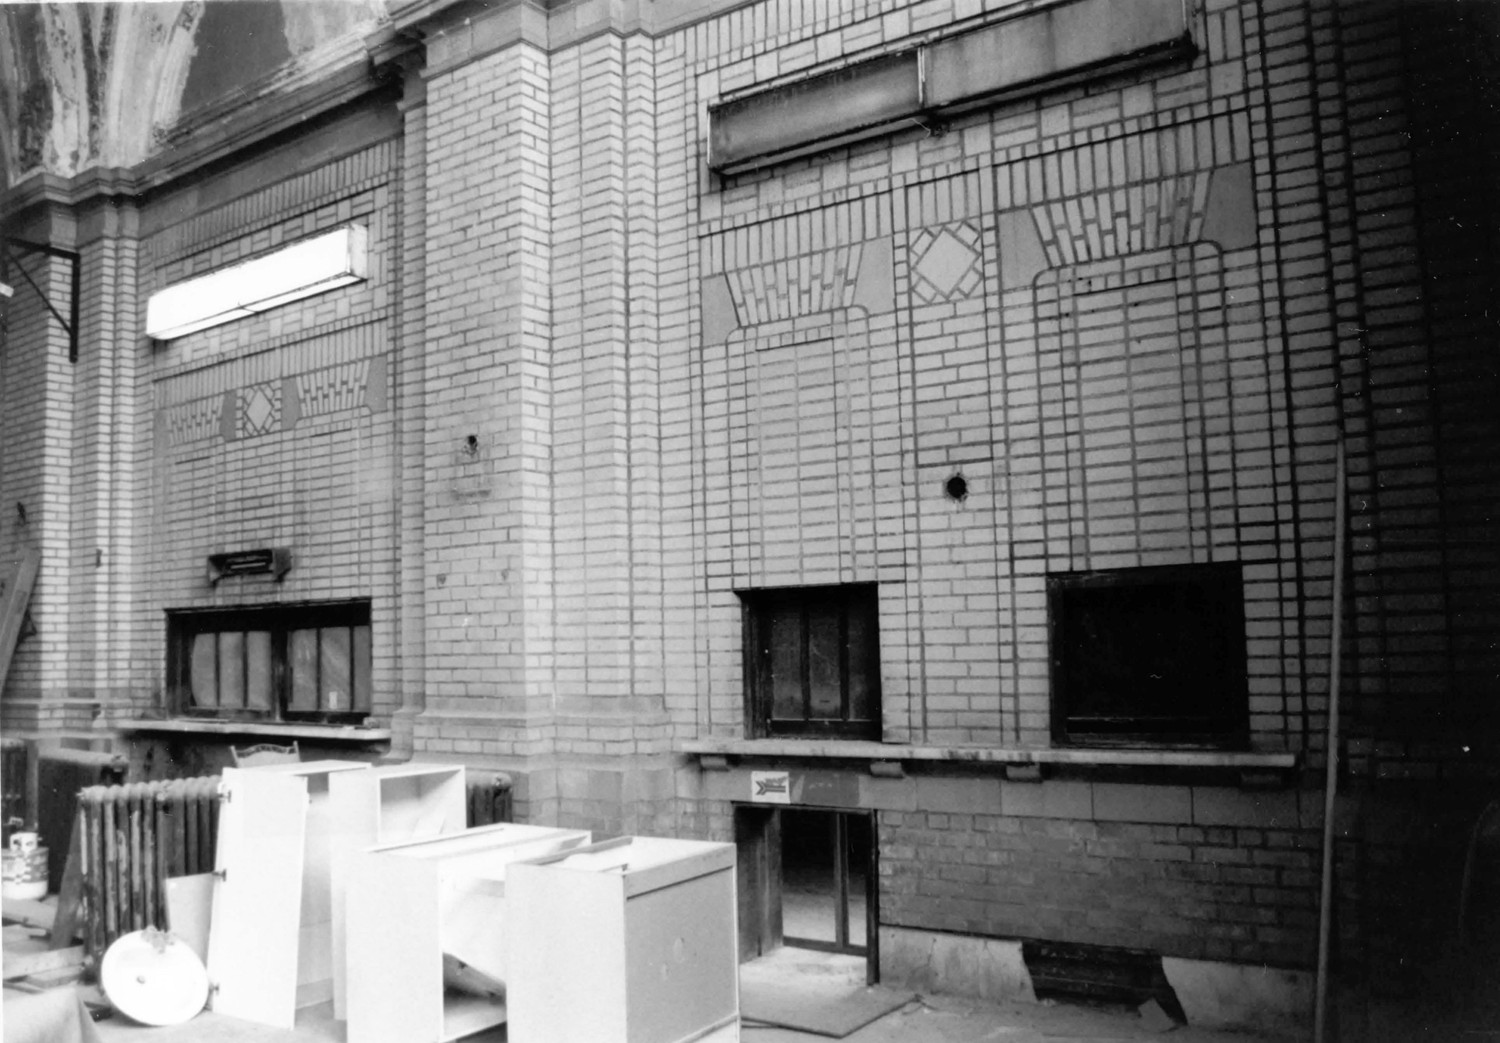 Pennsylvania Railroad Station - Baker Street Station, Fort Wayne Indiana Ticket windows in the west wall of the main concourse. (1997)